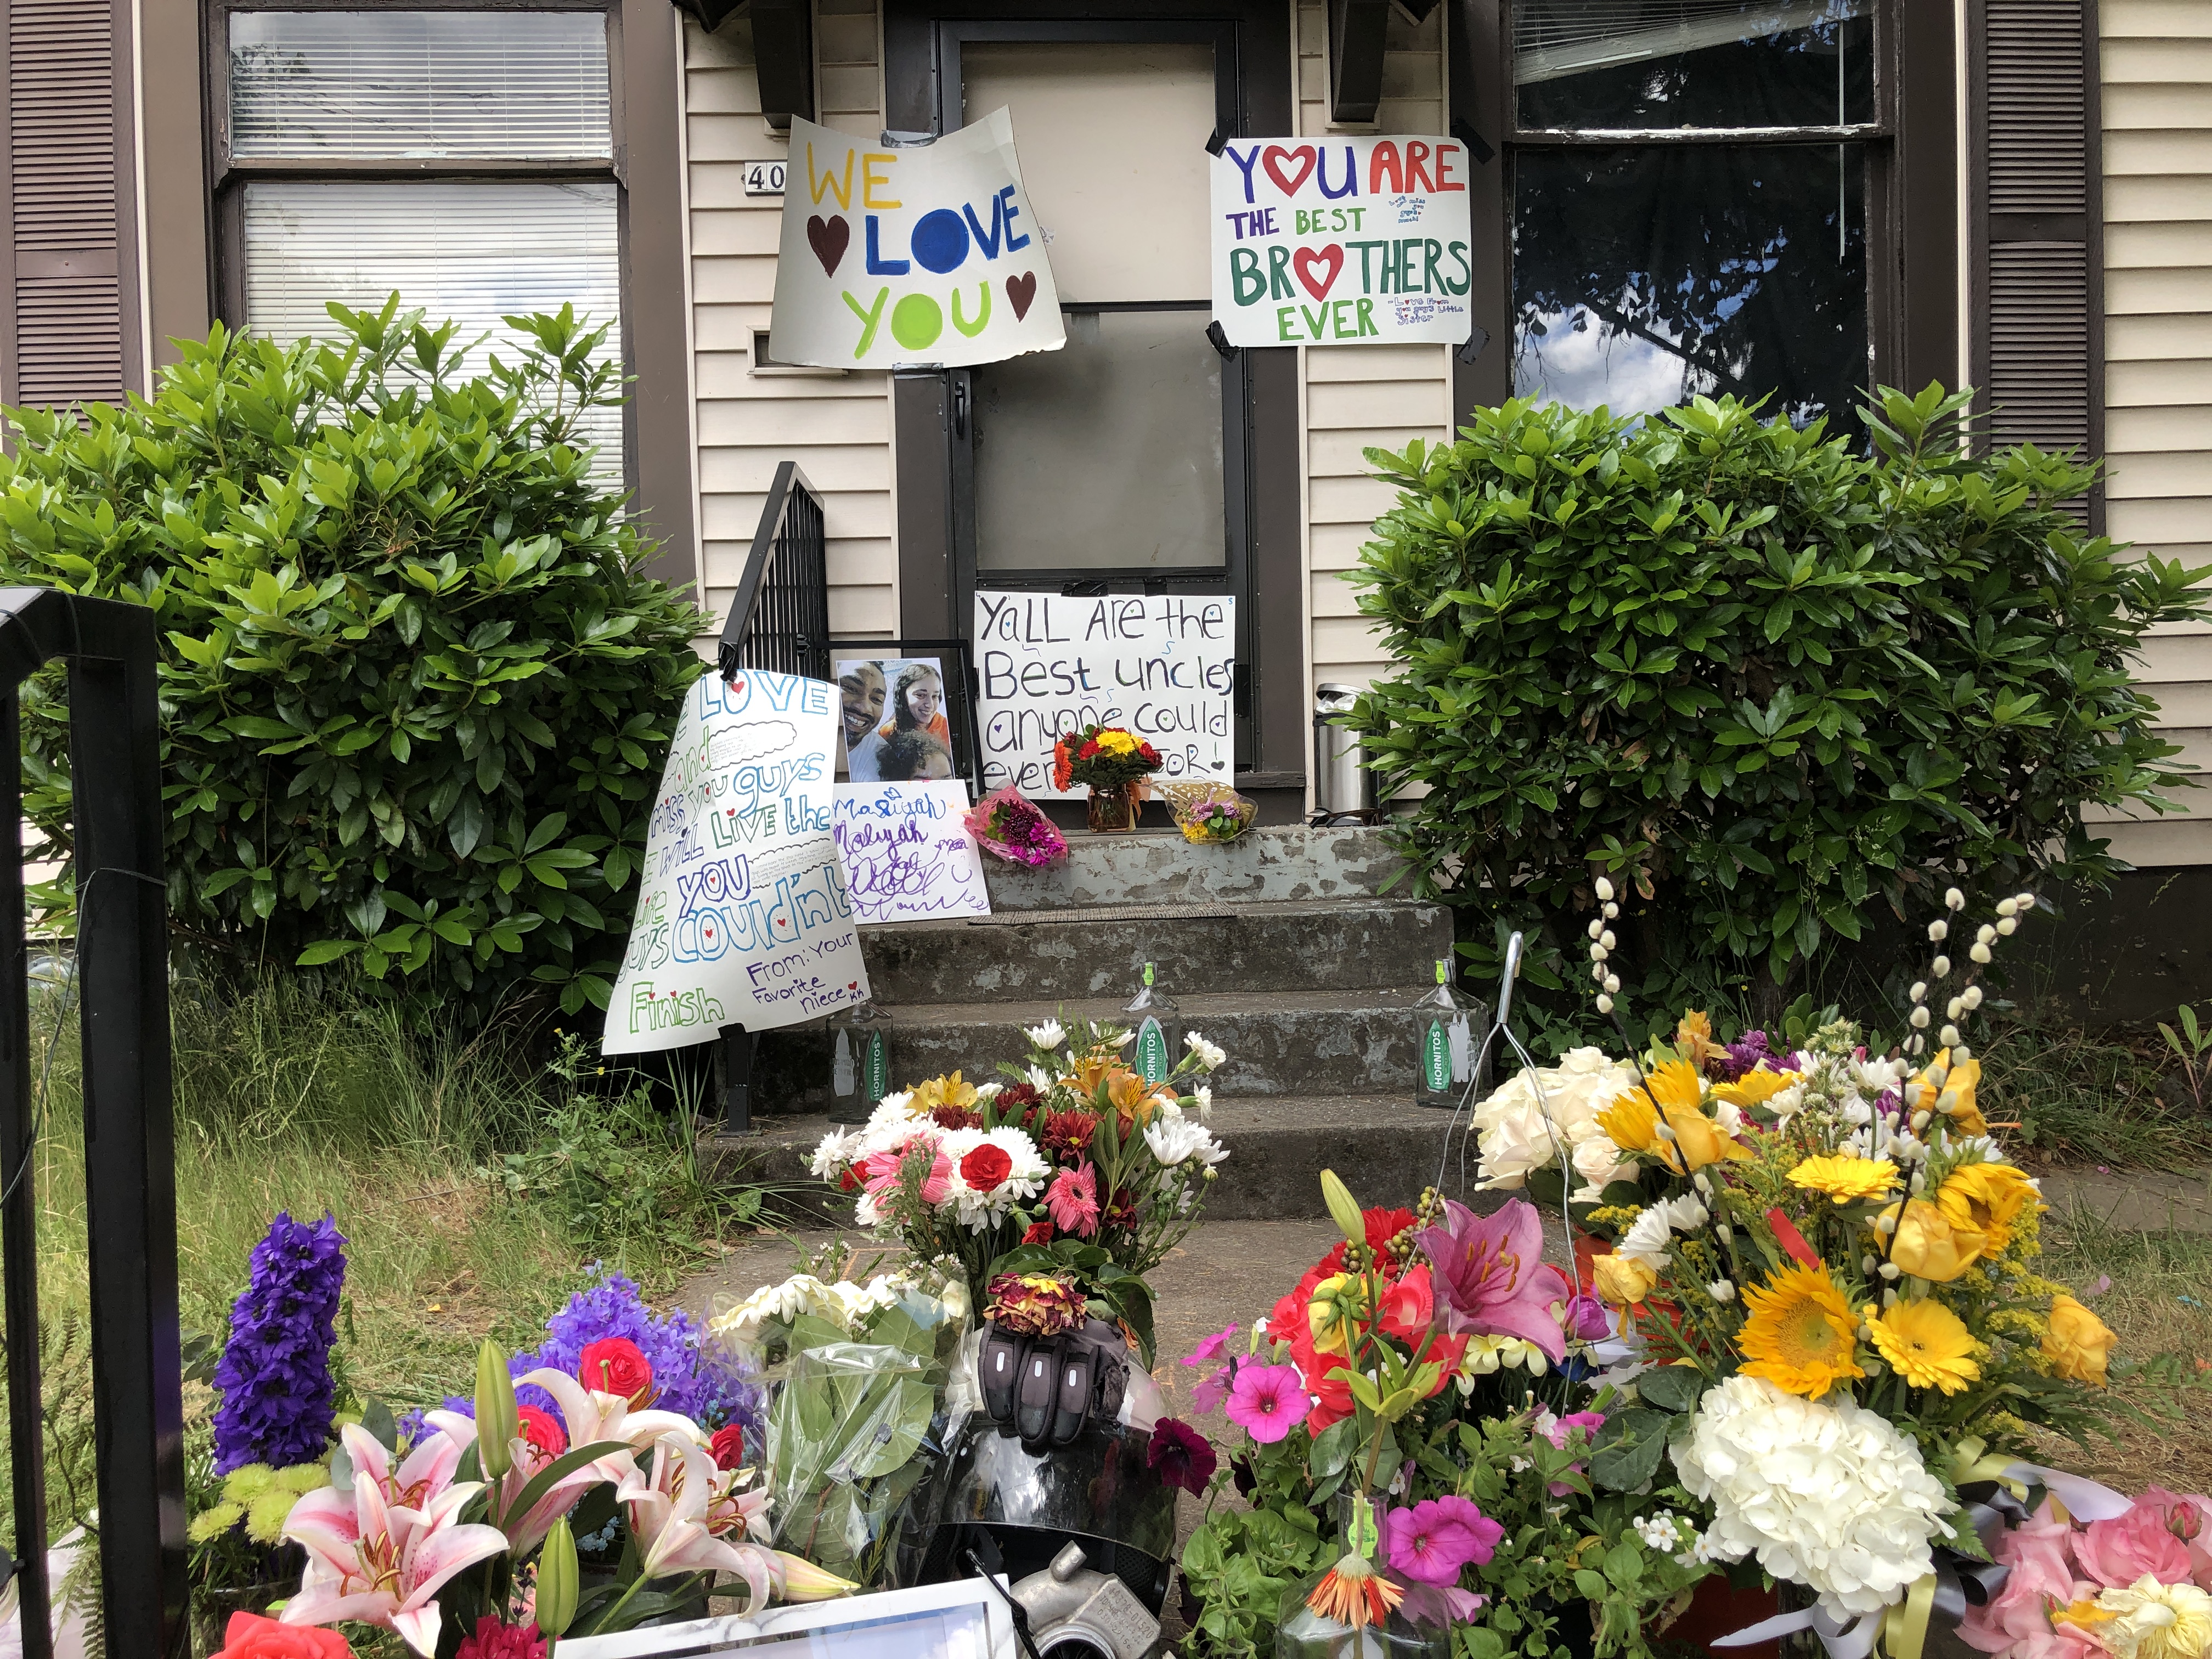 Mitchell Jay Nacoste, 31, and his half brother Kendall Preston Gragg, 27, were fatally shot inside a home on Southeast Boise Street about 10:45 p.m. June 6, 2021.